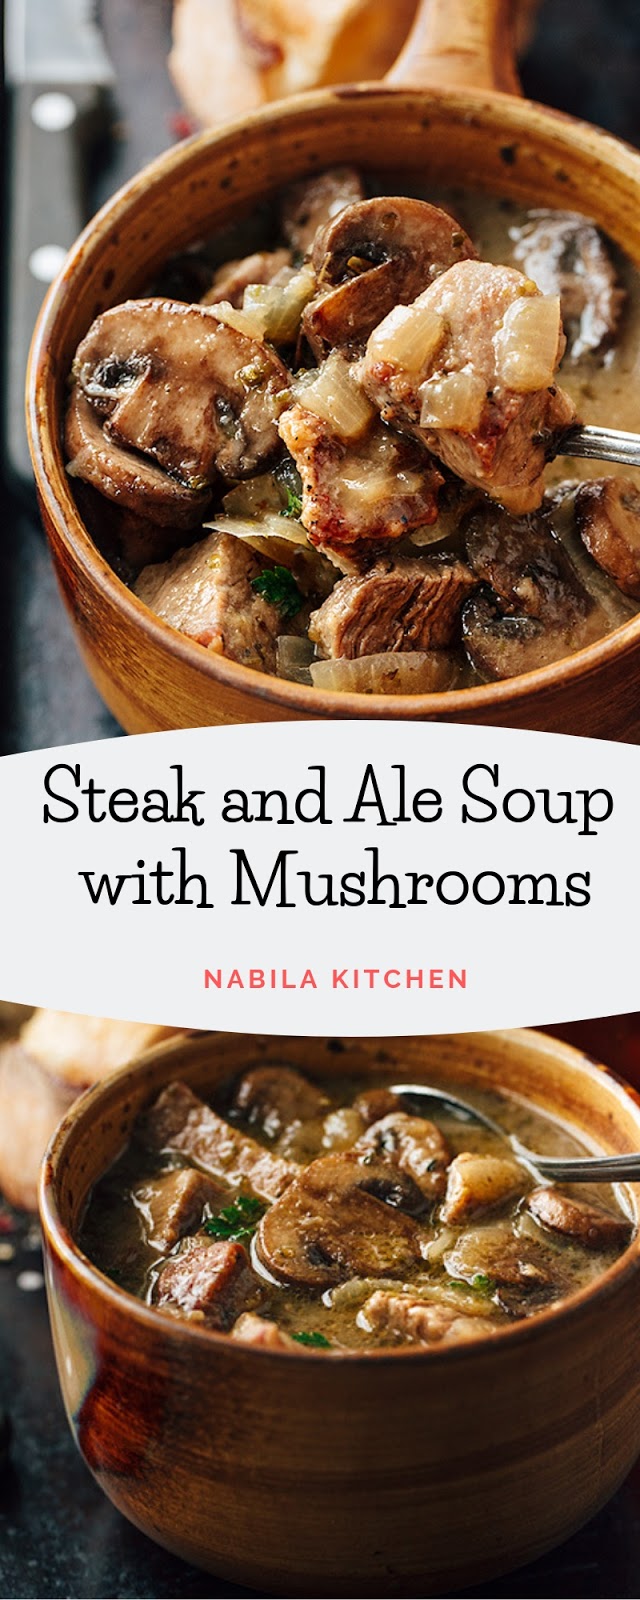   Tasty Steak and Ale Soup with Mushrooms Recipe